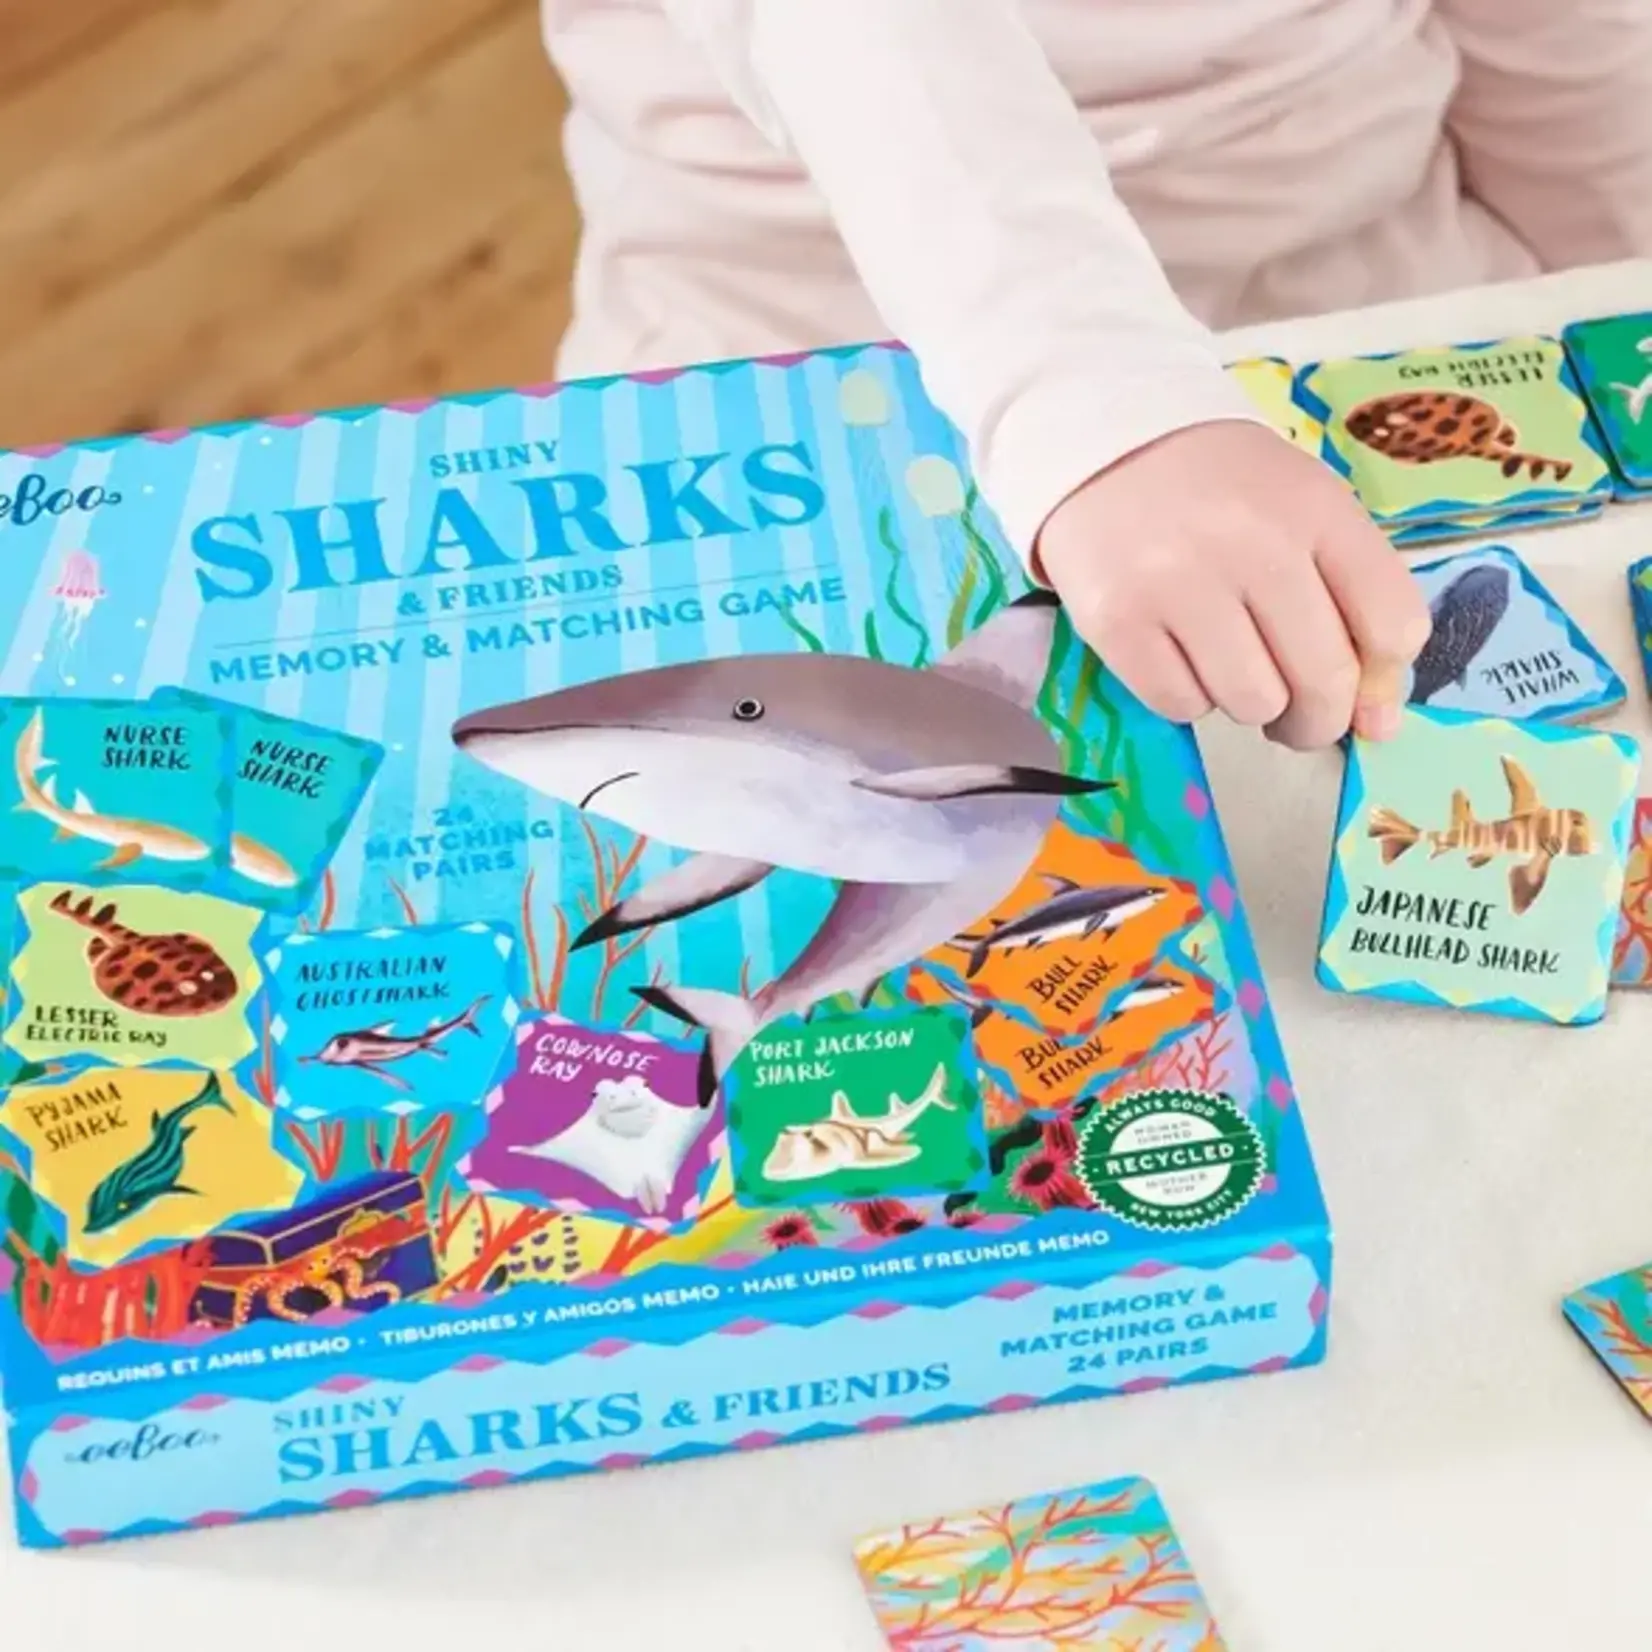 Sharks & Friends - Shiny Memory Matching Game